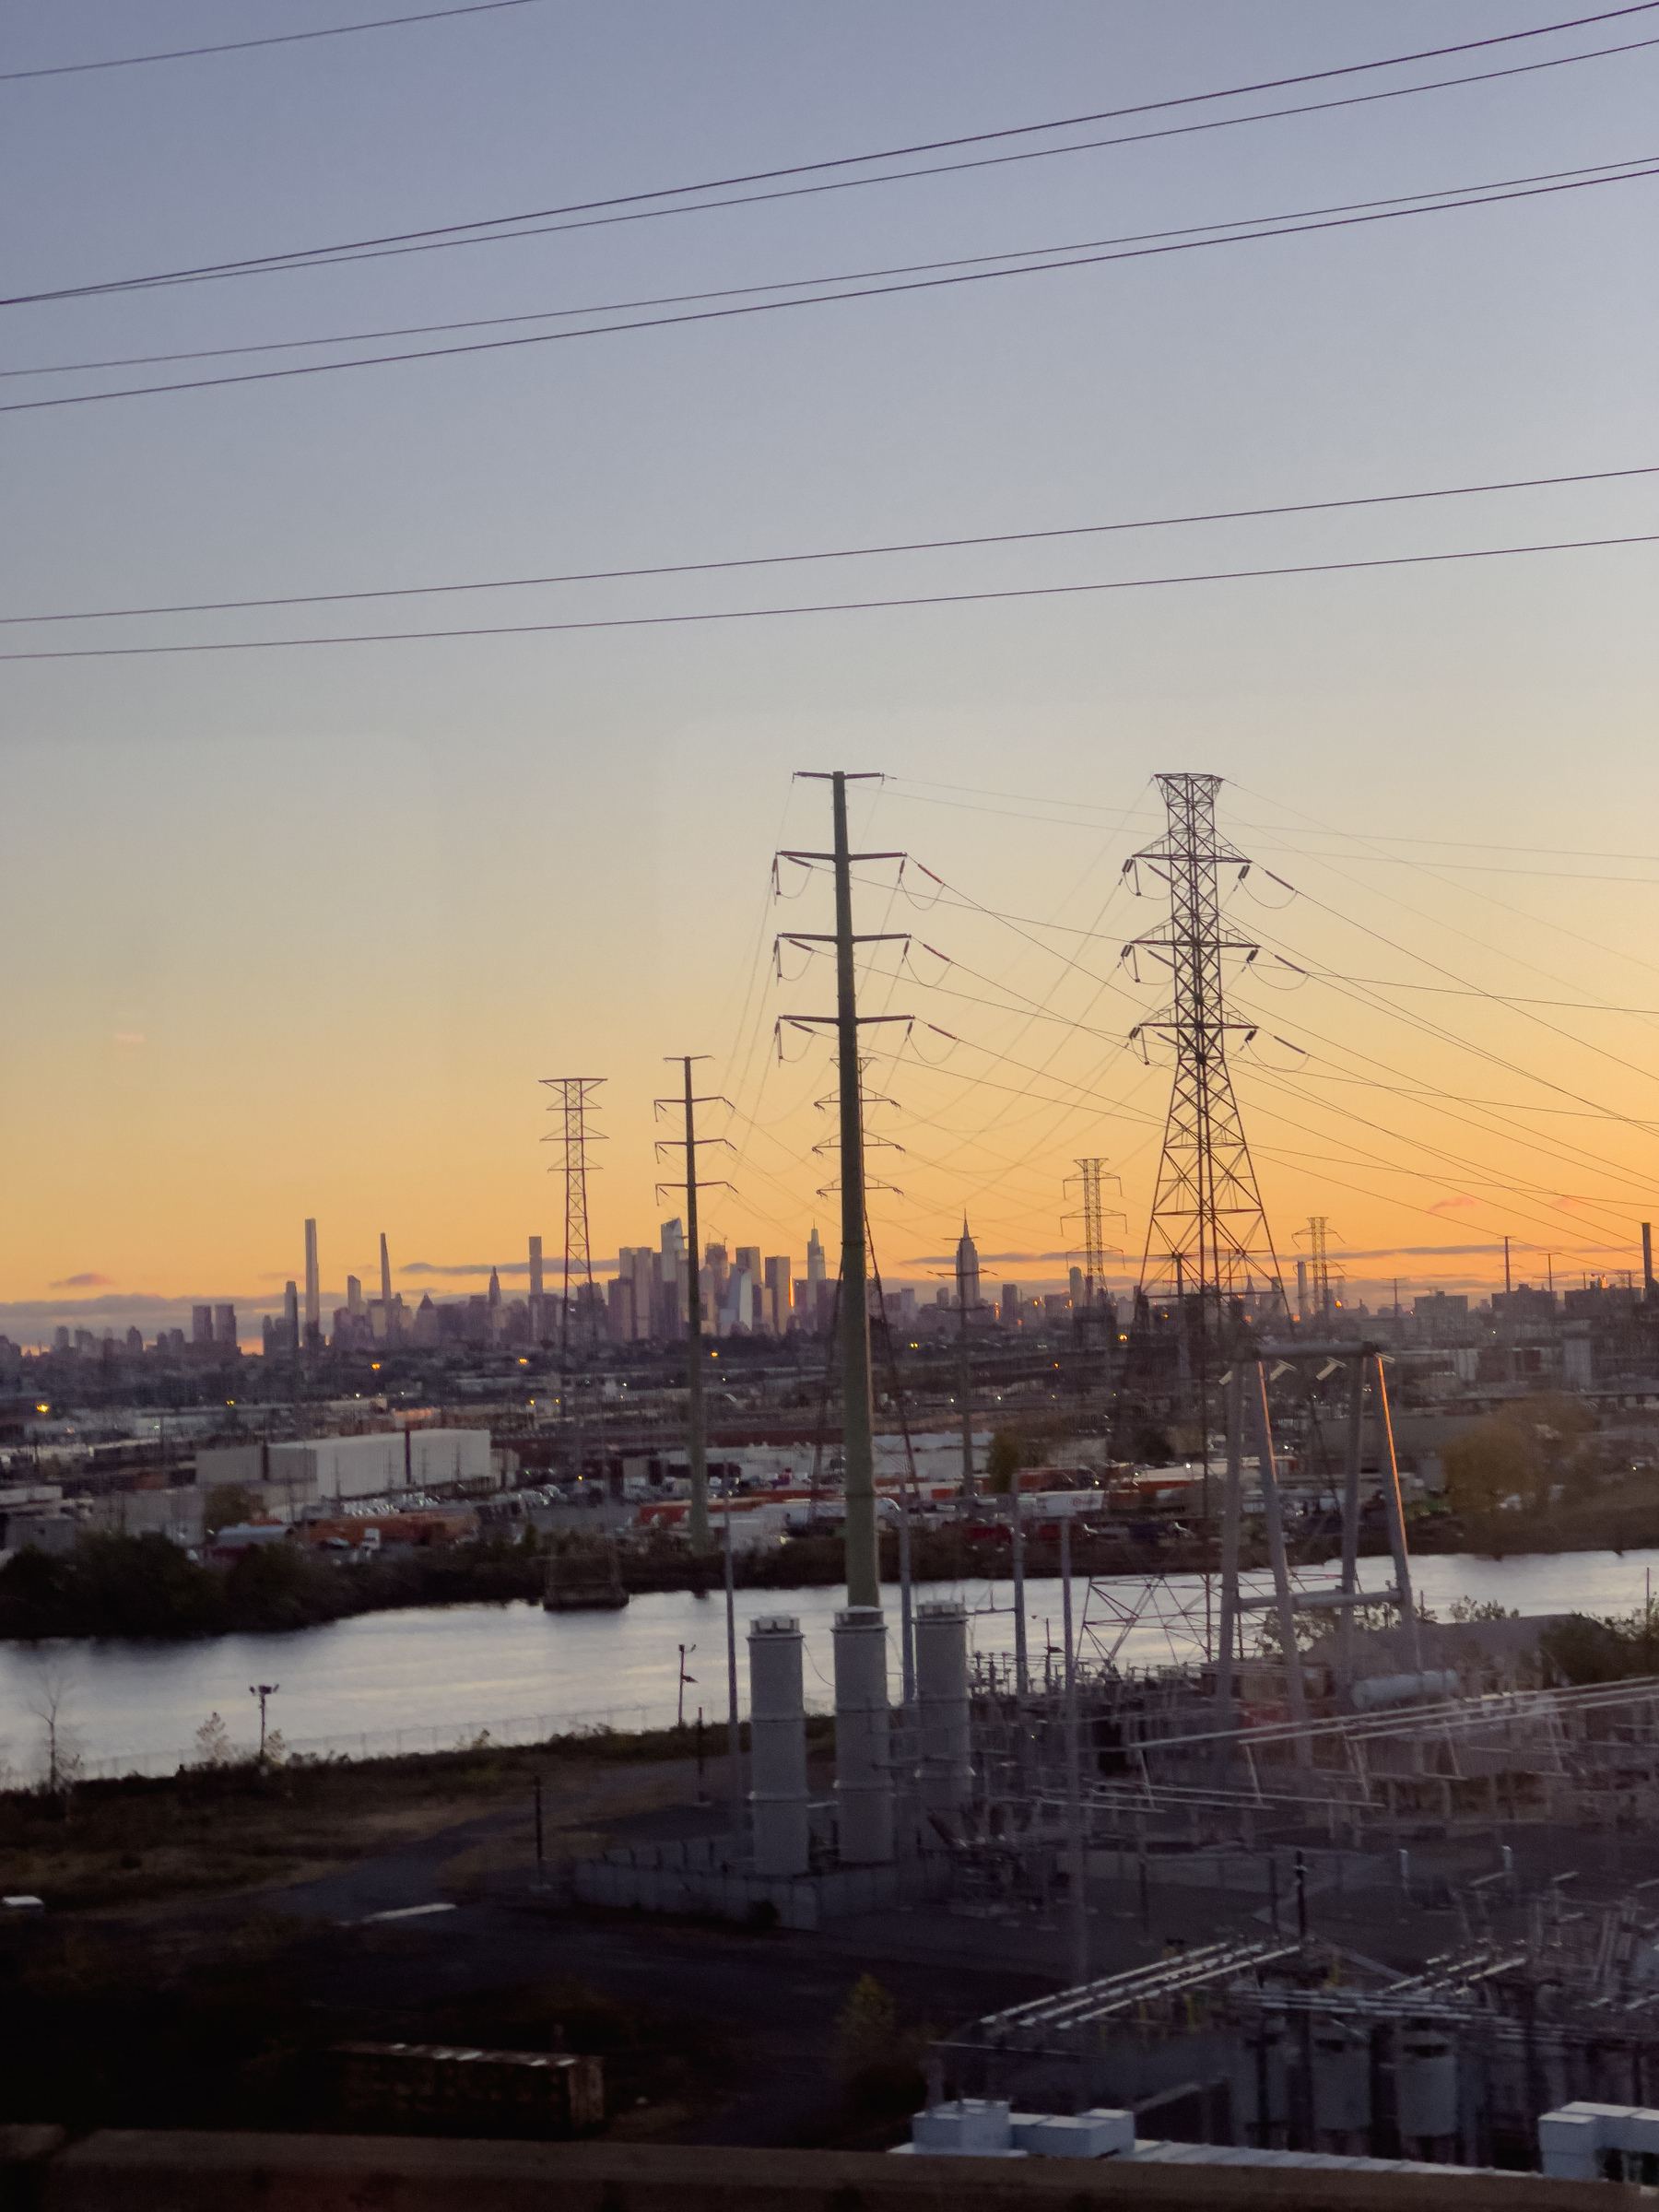 Industrial landscape with transmission towers in early morning light.